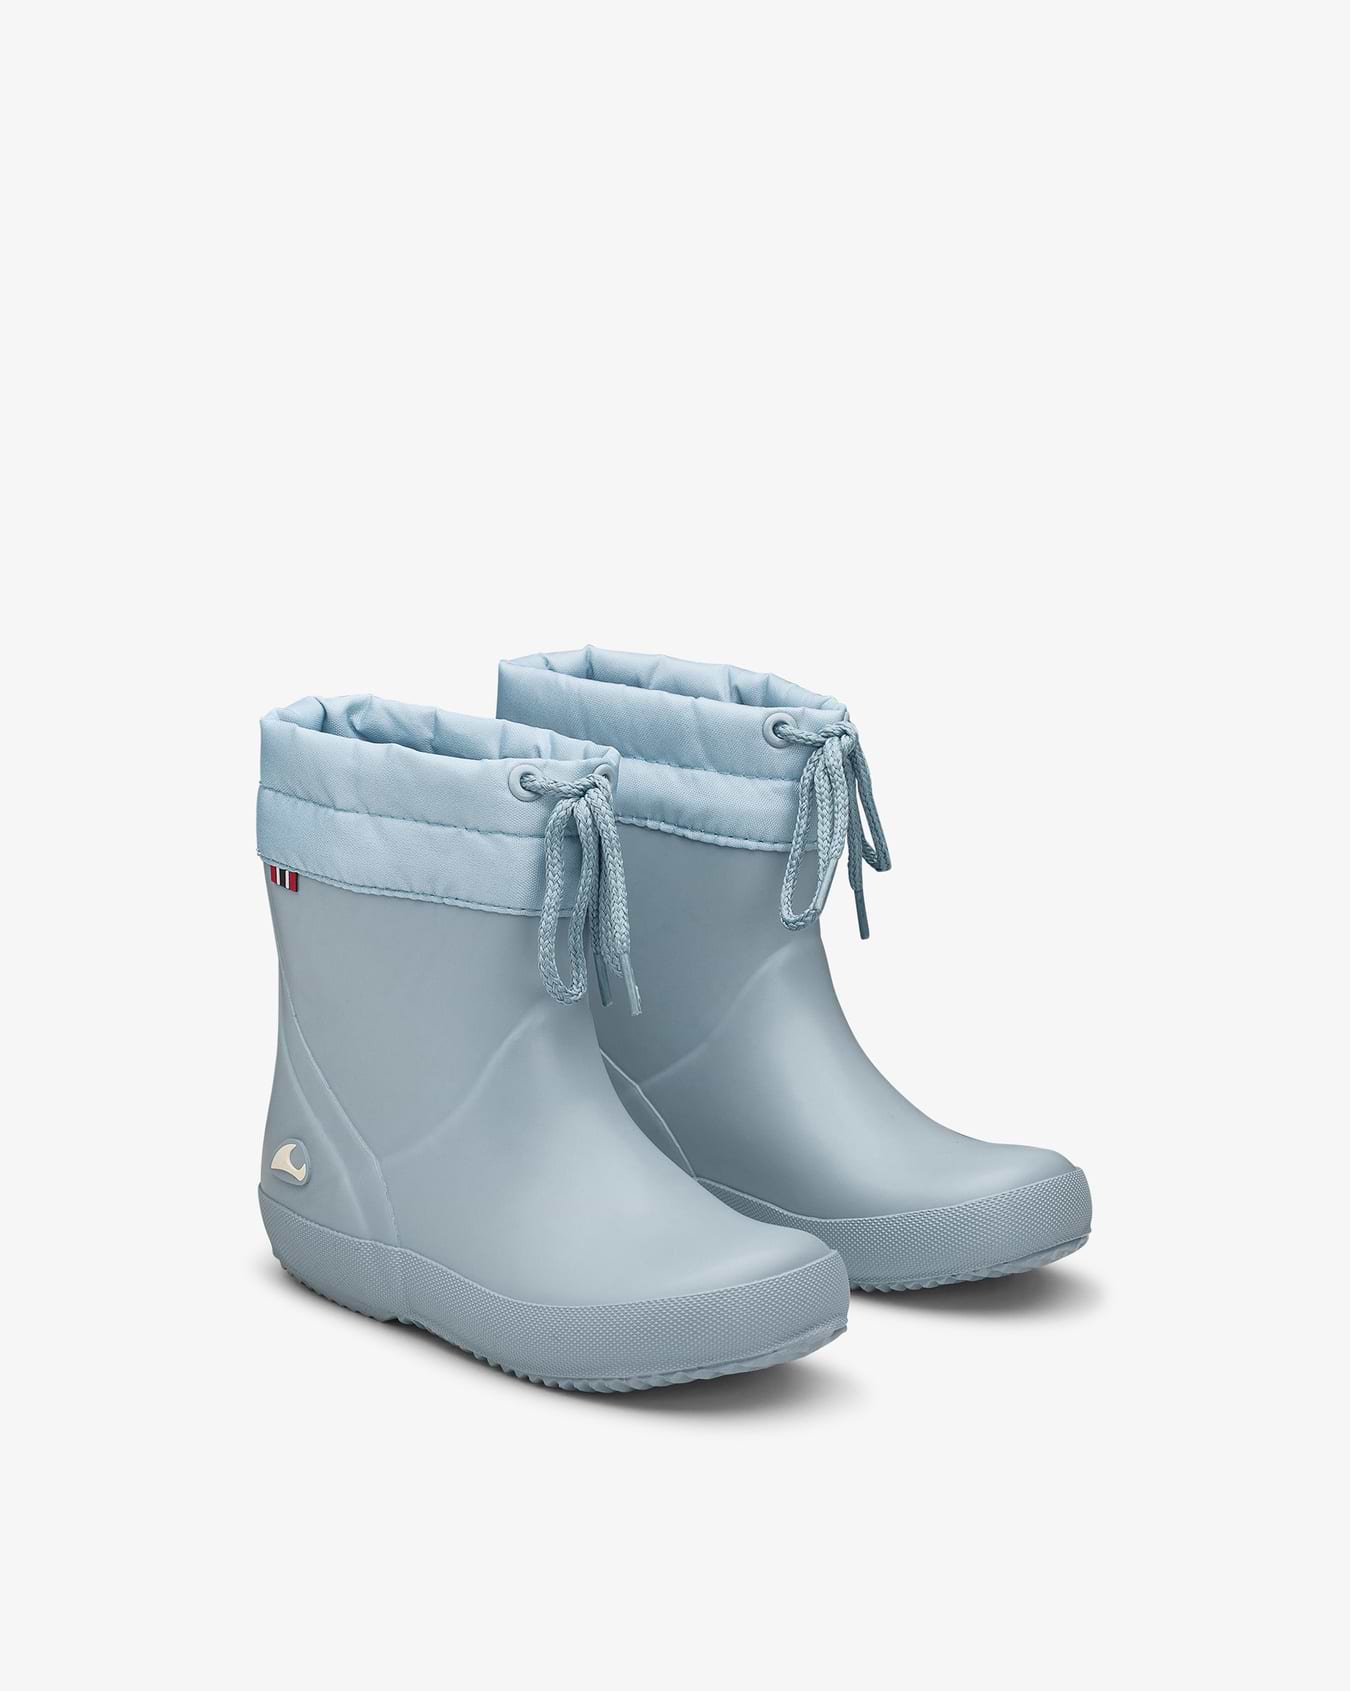 Alv Indie Iceblue Rubber Boot